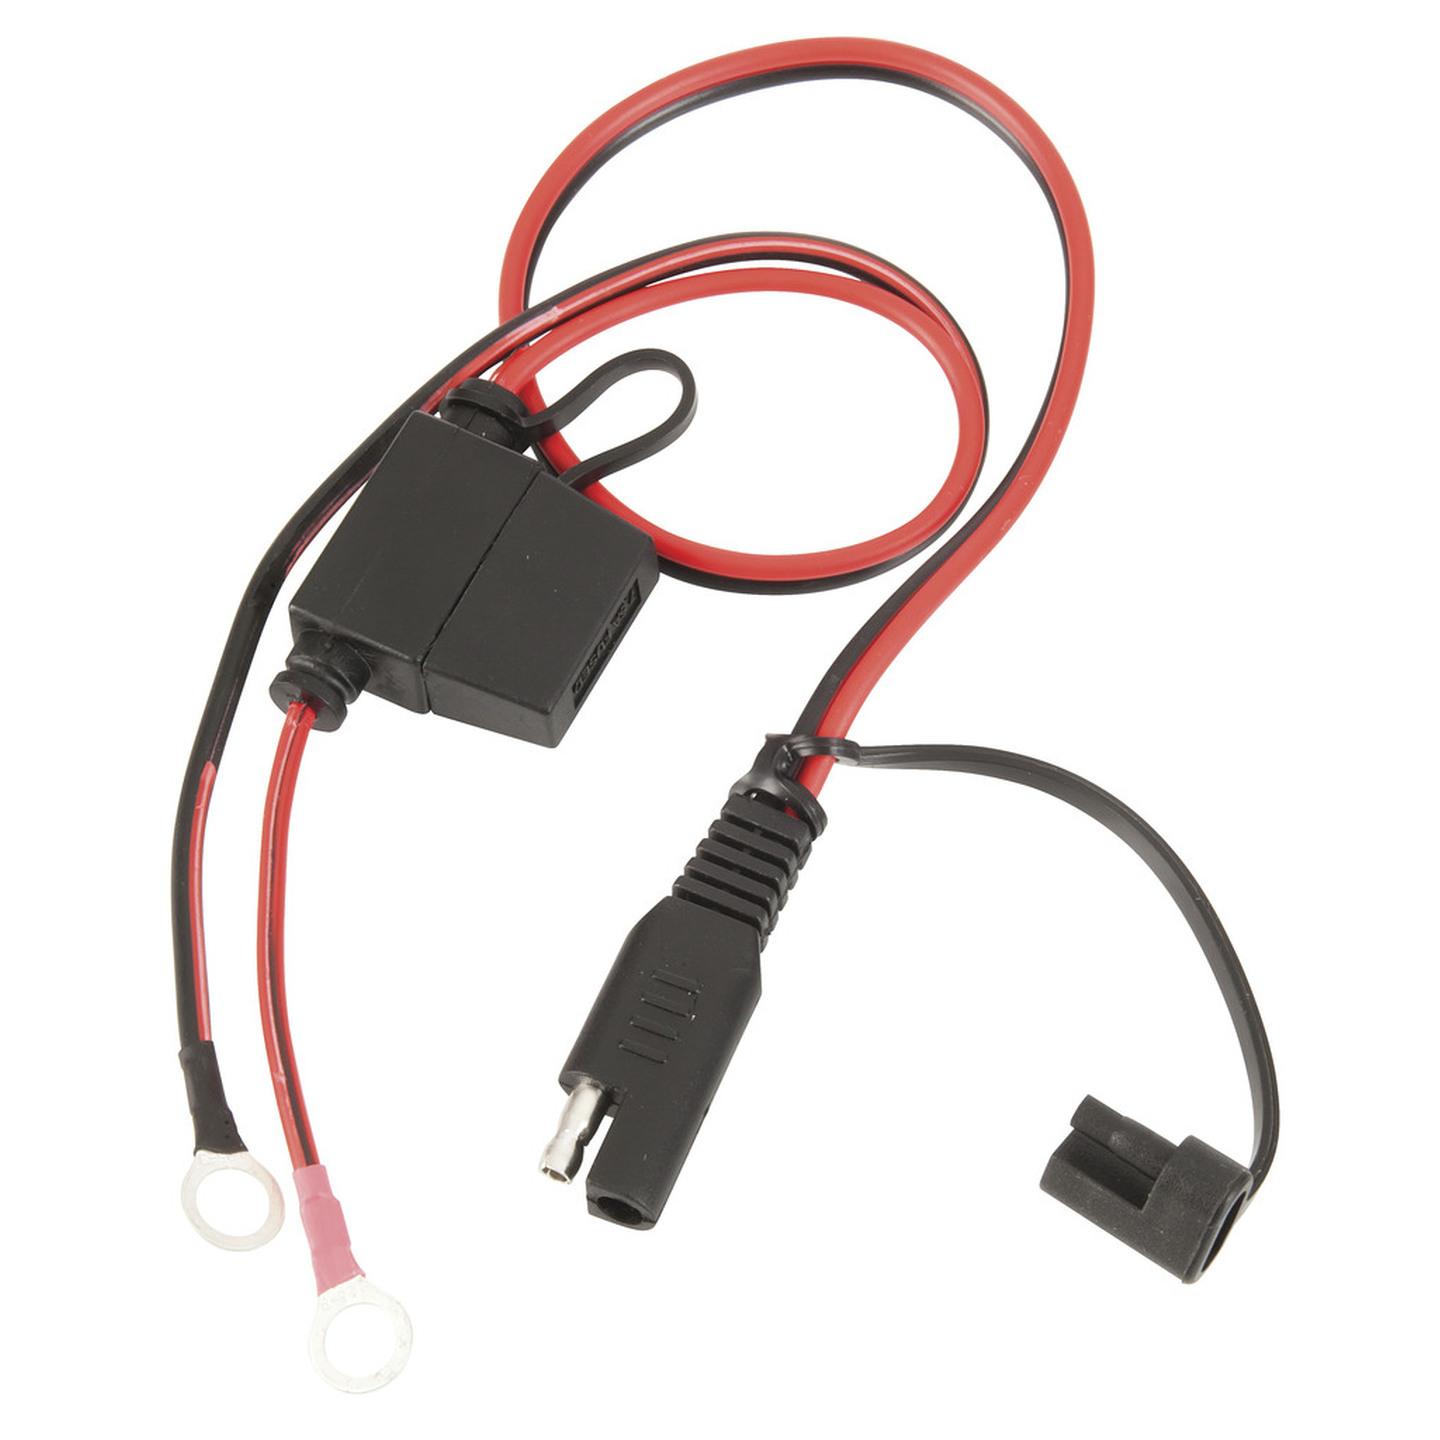 SAE Plug to Battery Terminal Fused Cable